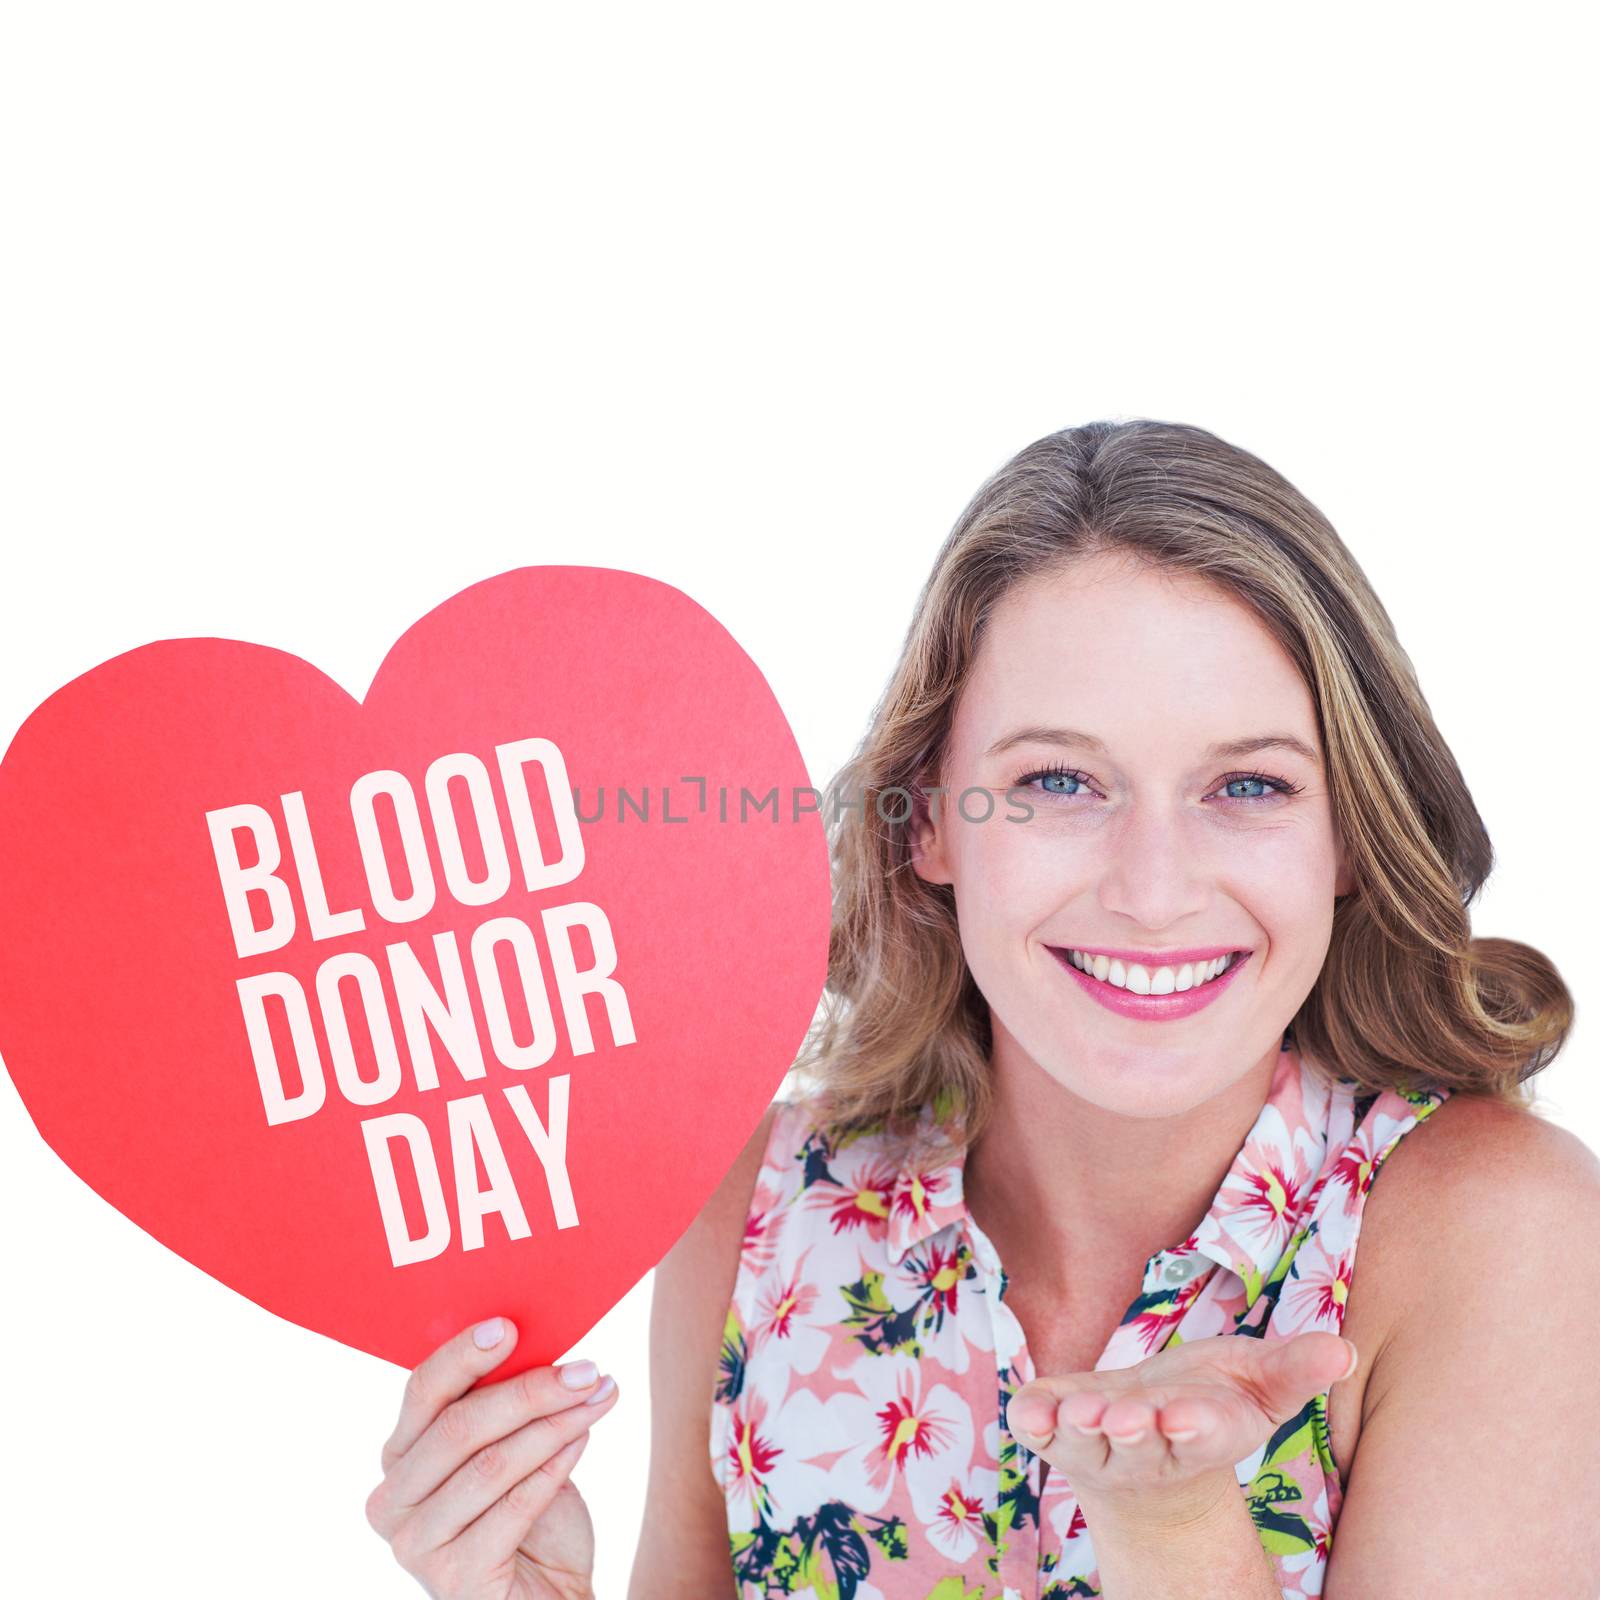 Woman holding heart card and blowing kiss against blood donor day